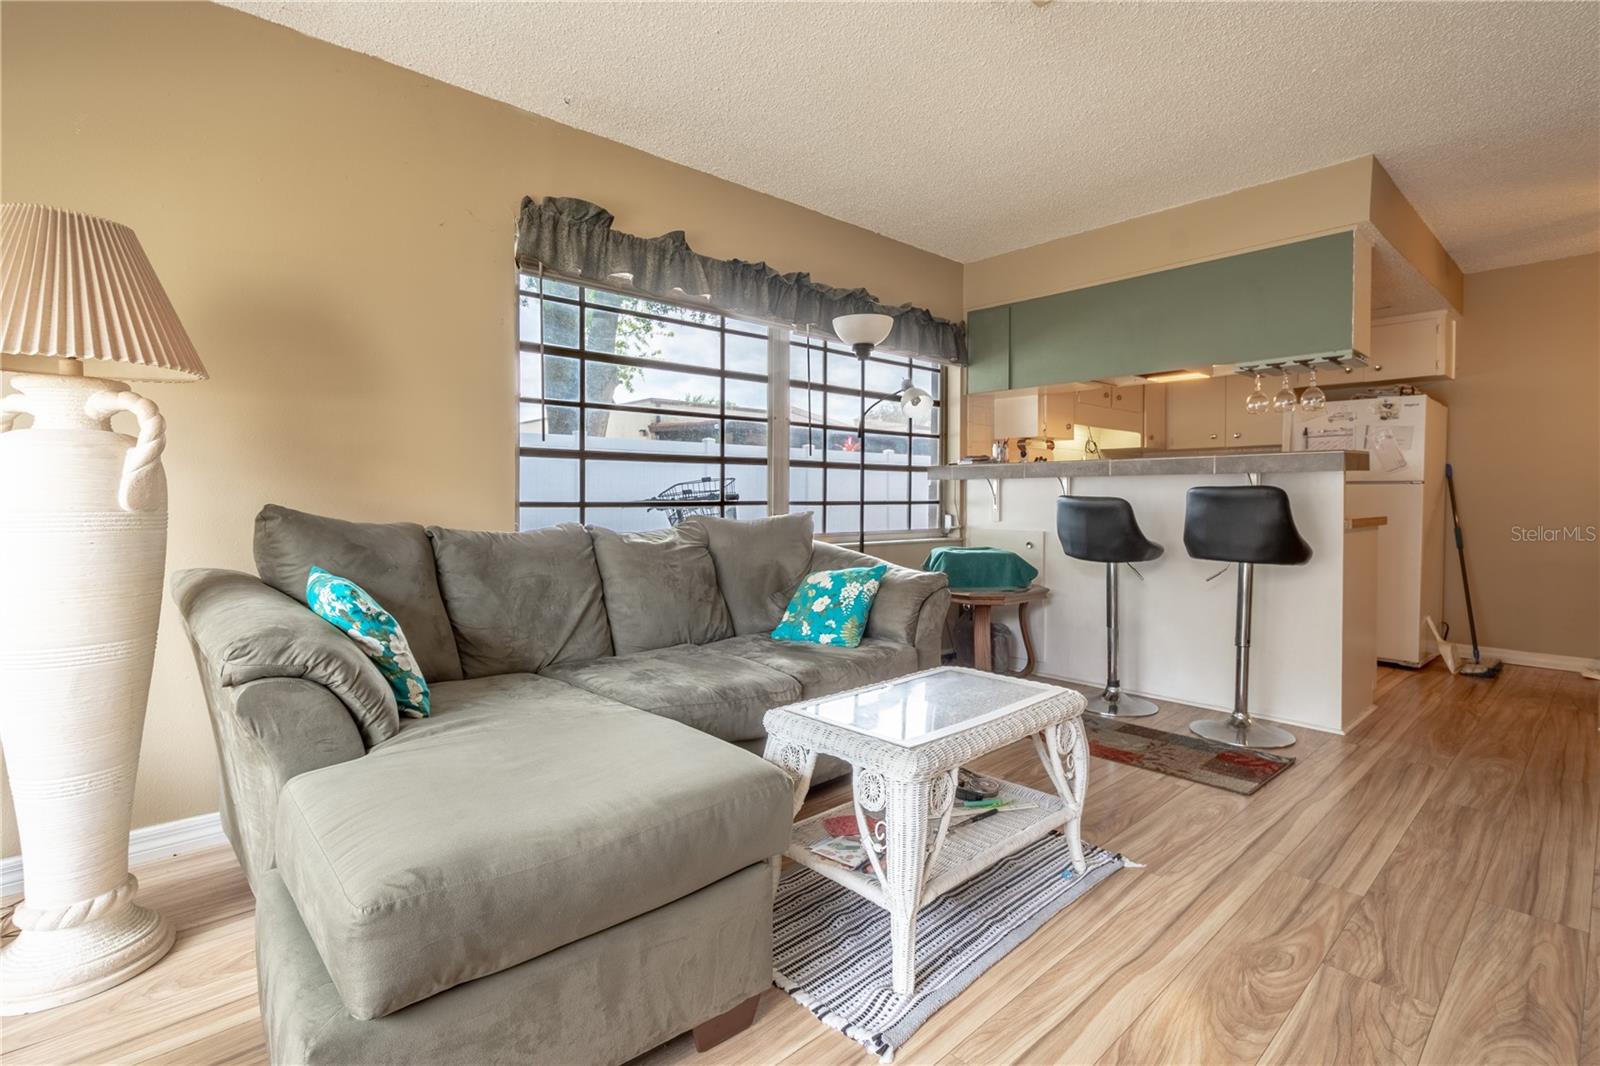 The living room is open to the kitchen and breakfast bar and features wood laminate flooring.